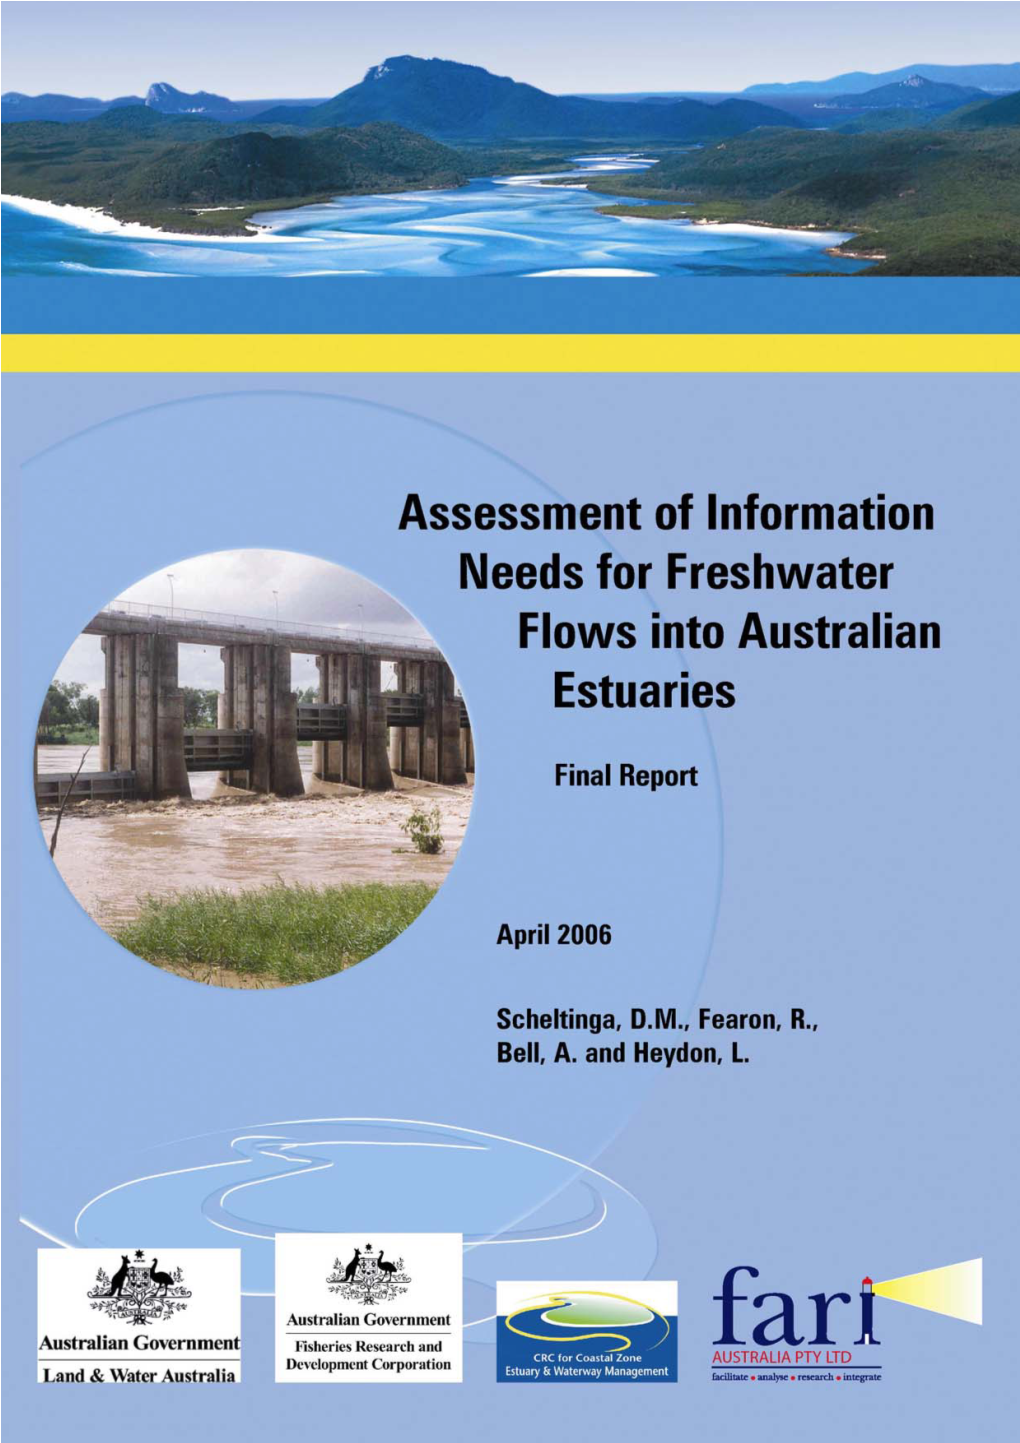 Information Needs for Freshwater Flows Into Estuaries